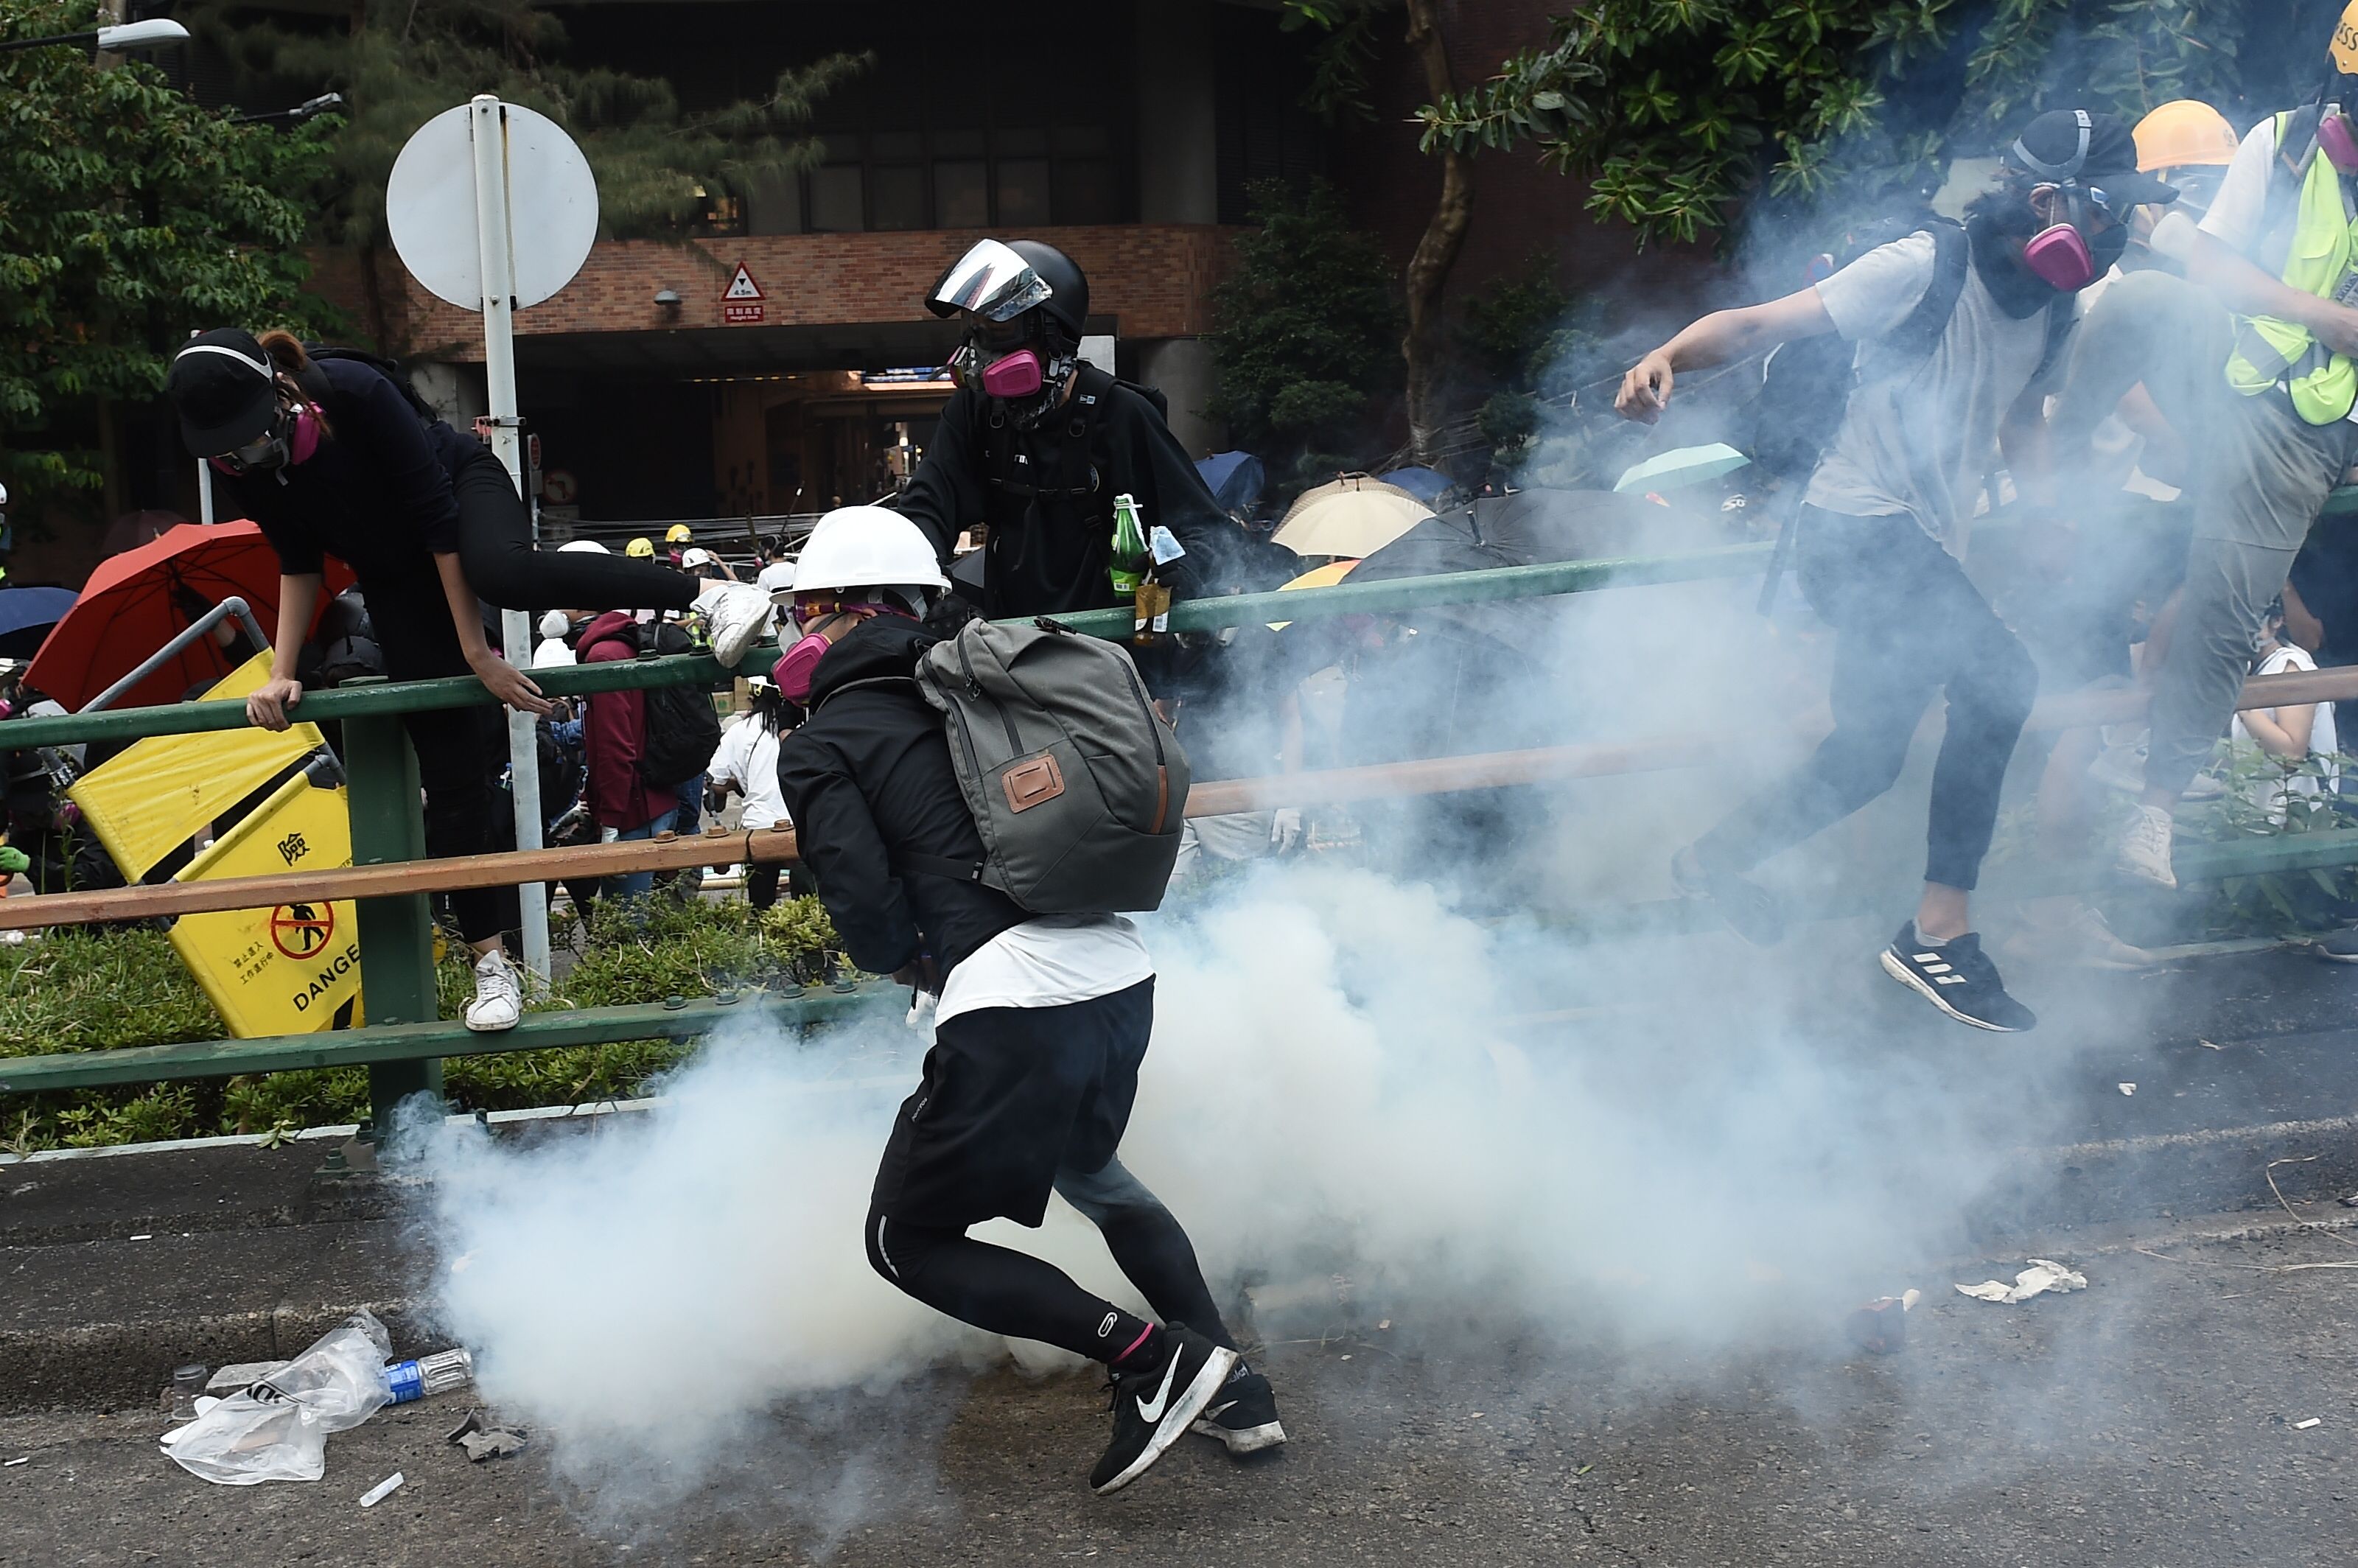 Police fire tear gas as protesters try to leave Hong Kong Polytechnic University on November 18, 2019.